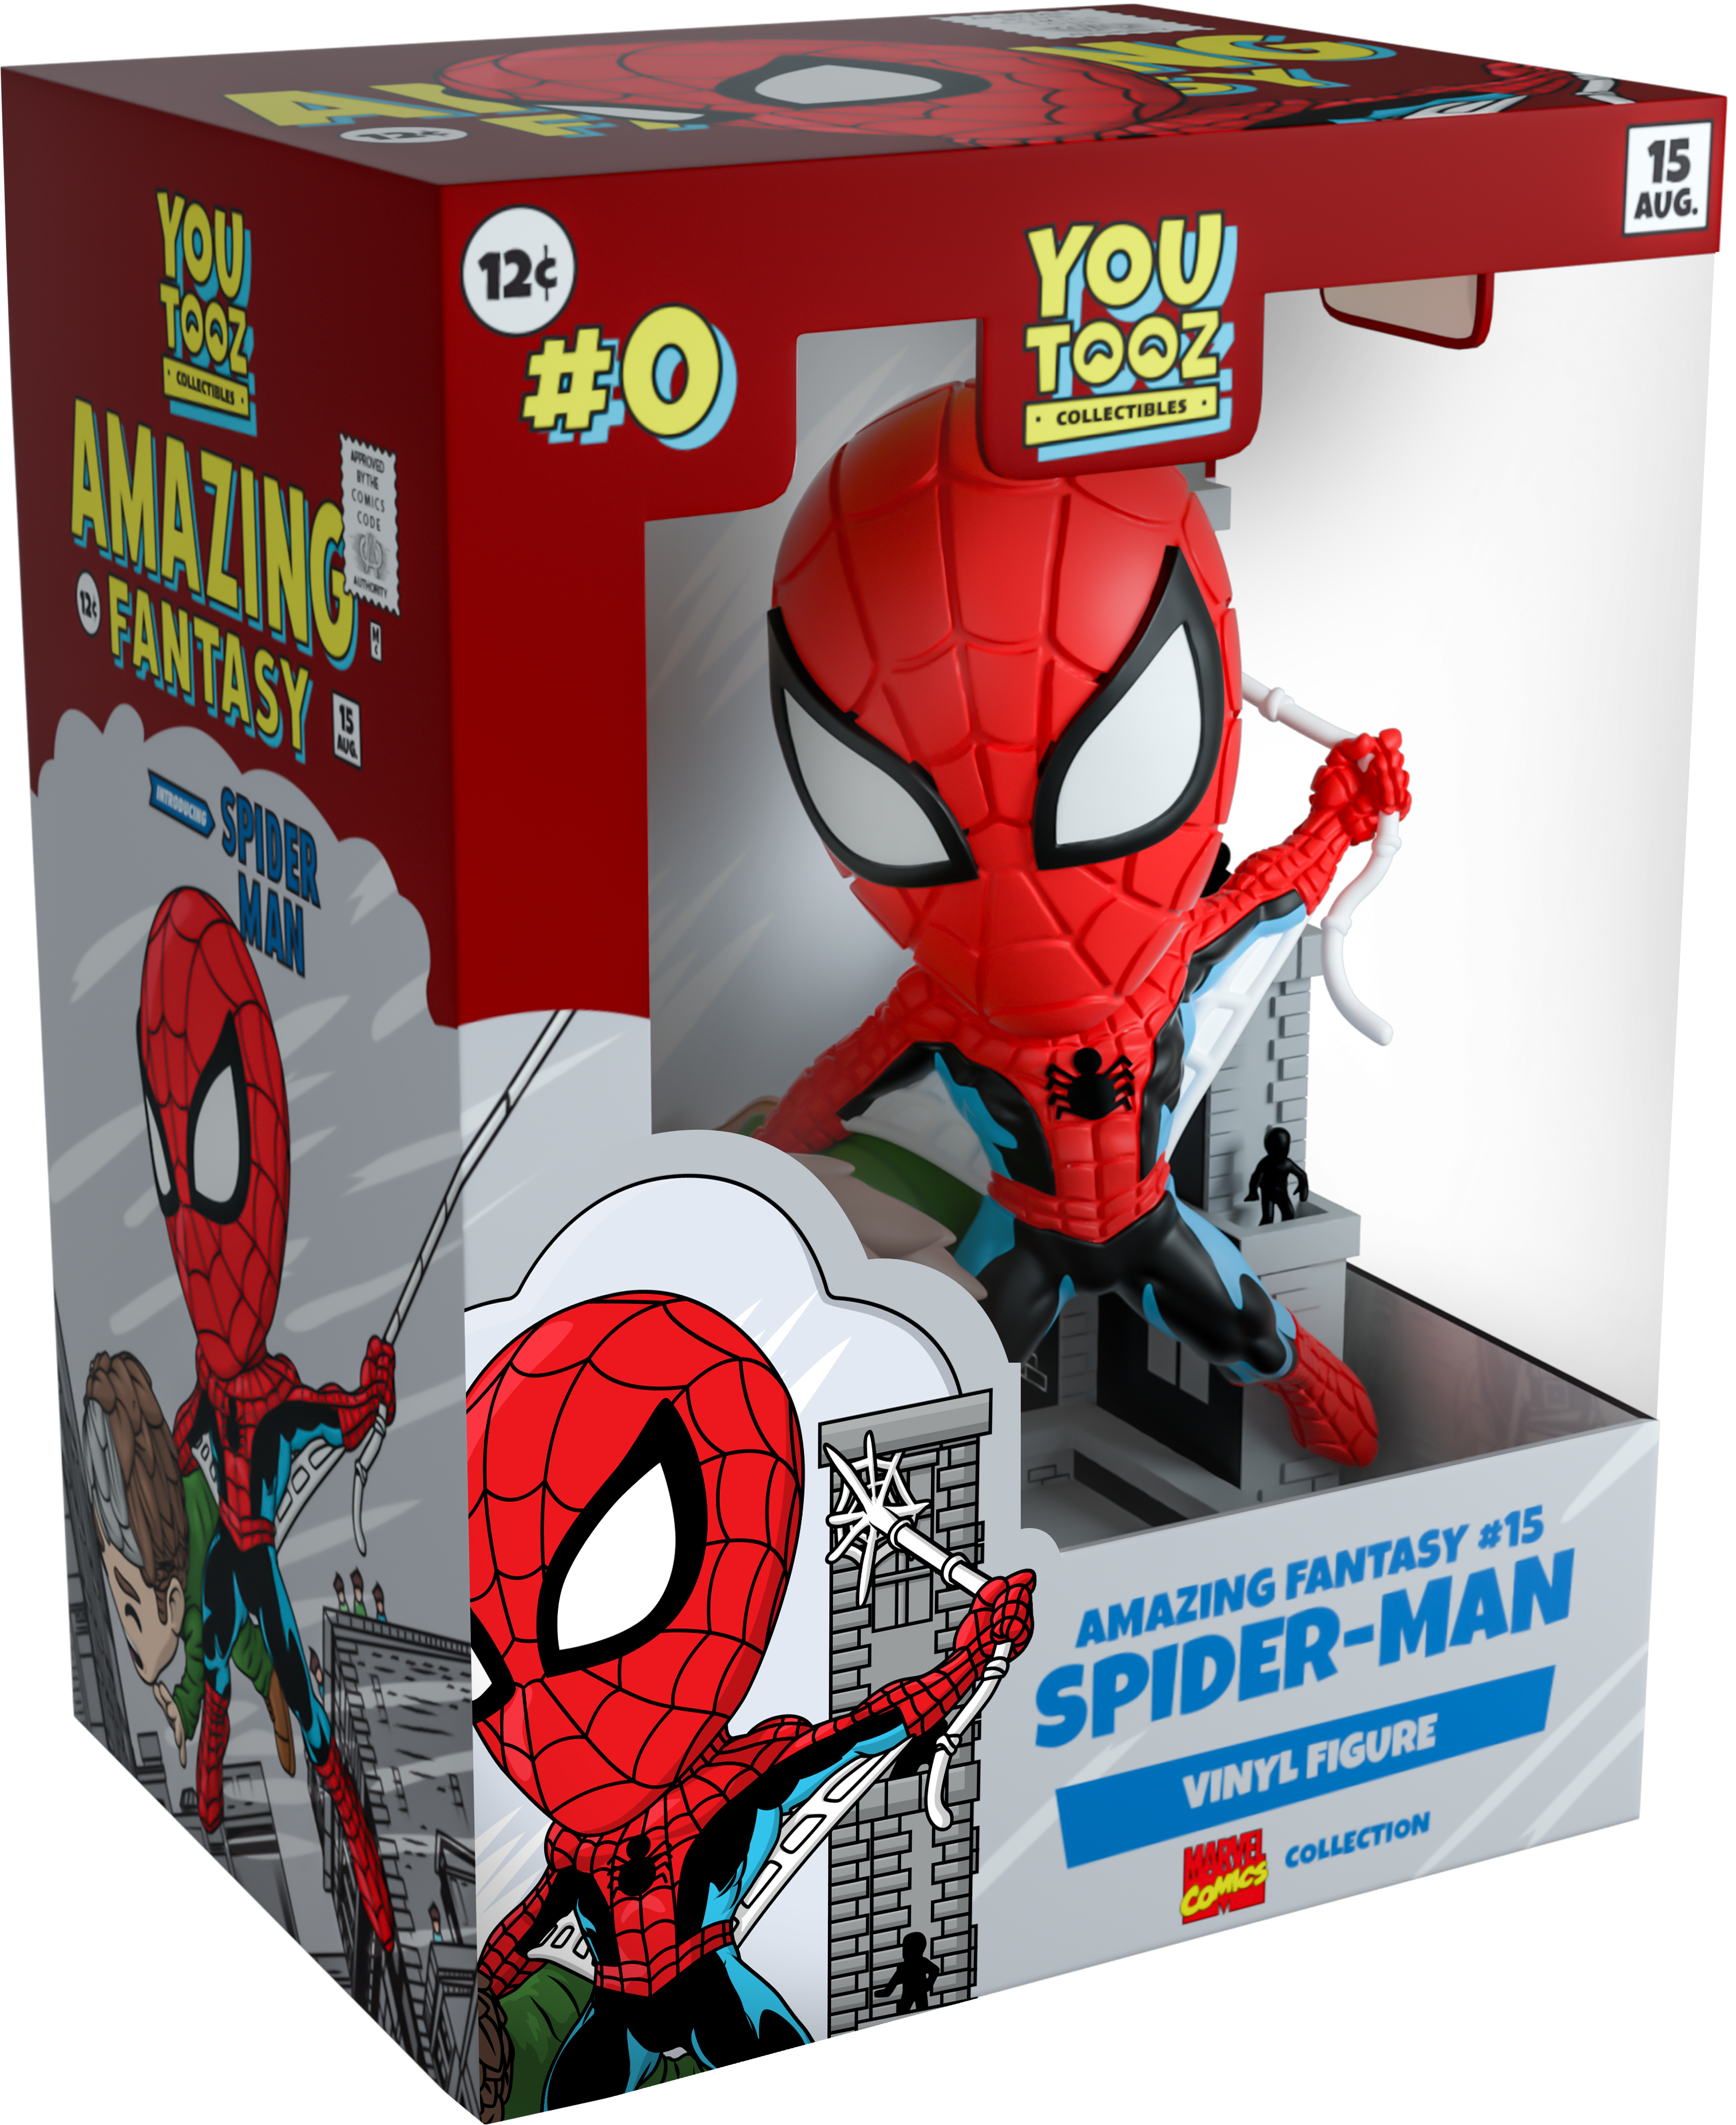 Spider-Man 2099 #1 – Youtooz Collectibles